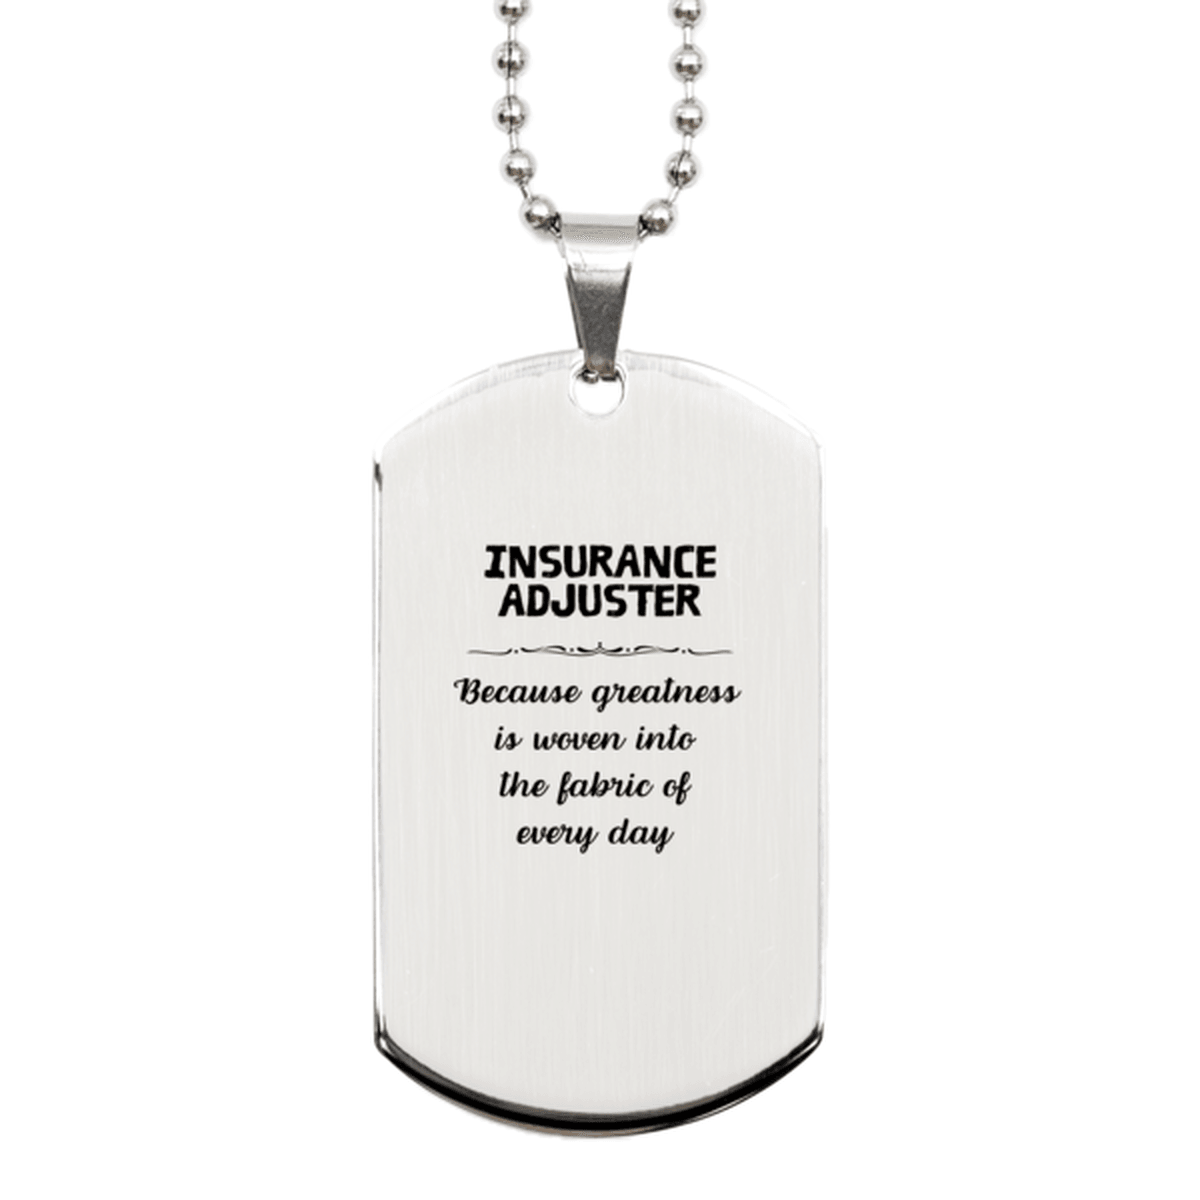 Sarcastic Insurance Adjuster Silver Dog Tag Gifts, Christmas Holiday Gifts for Insurance Adjuster Birthday, Insurance Adjuster: Because greatness is woven into the fabric of every day, Coworkers, Friends - Mallard Moon Gift Shop